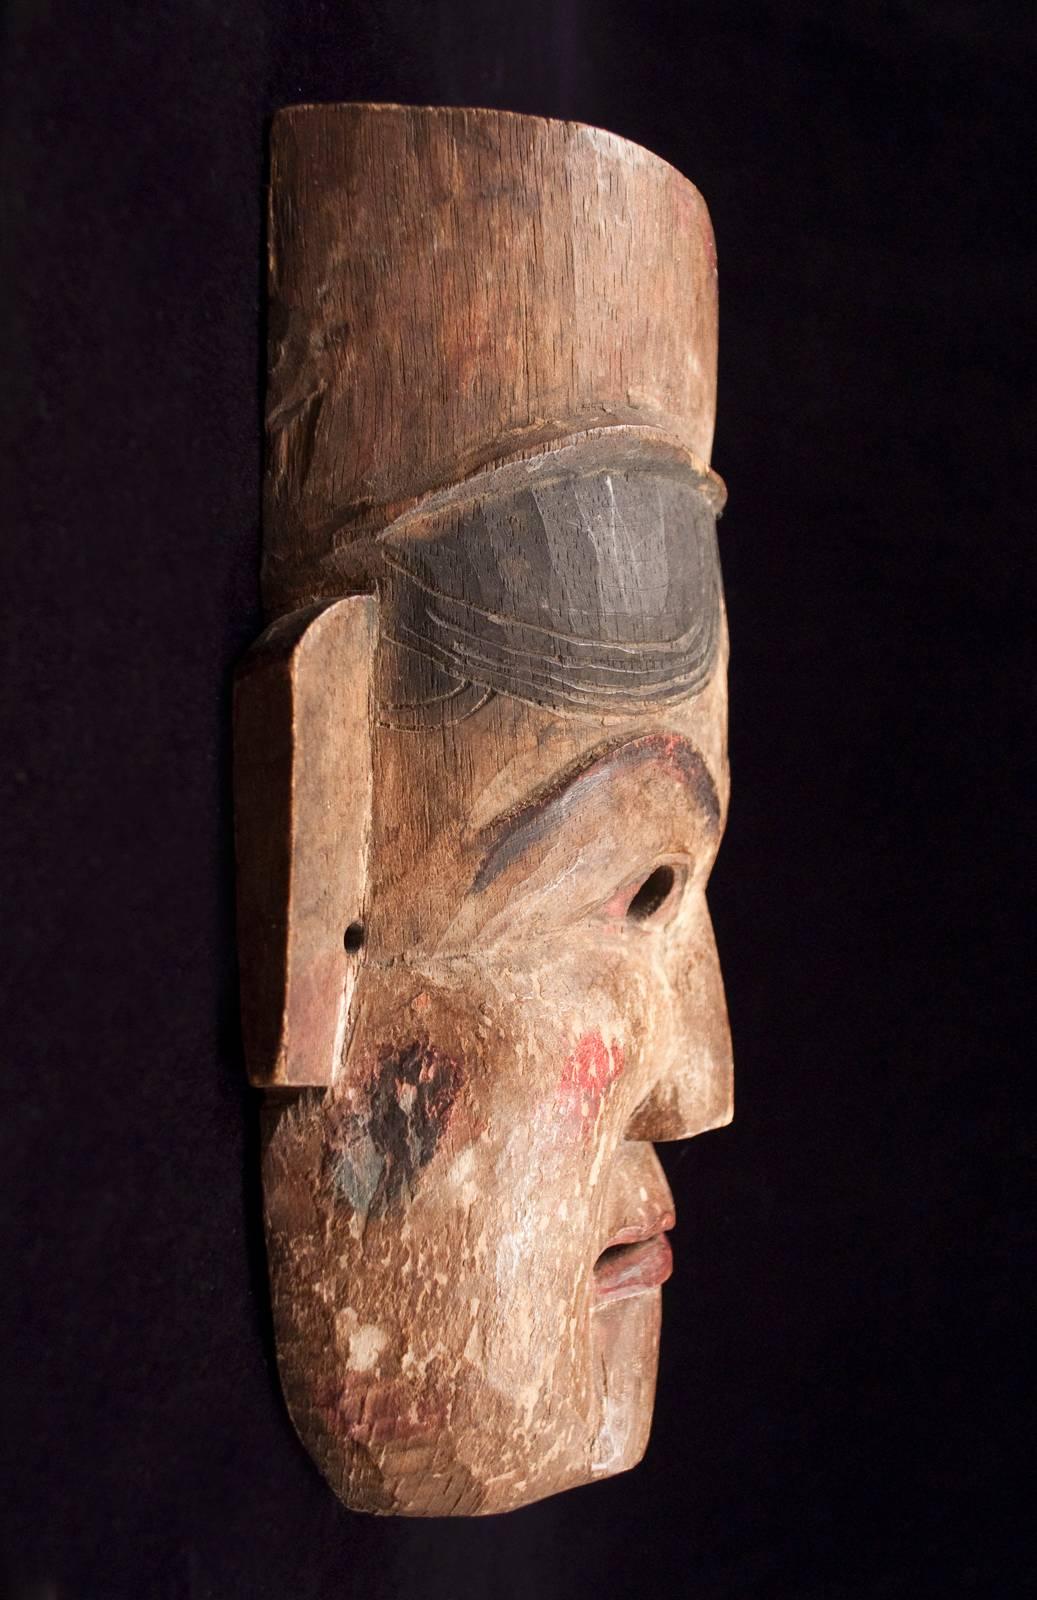 Late 19th-early 20th century wood theater mask from Nepal

The tone of the emotion conveyed with this very expressive mask, which was used in local theatrical enactments, likely changed with the tilt of the head, lighting and context. Whether being